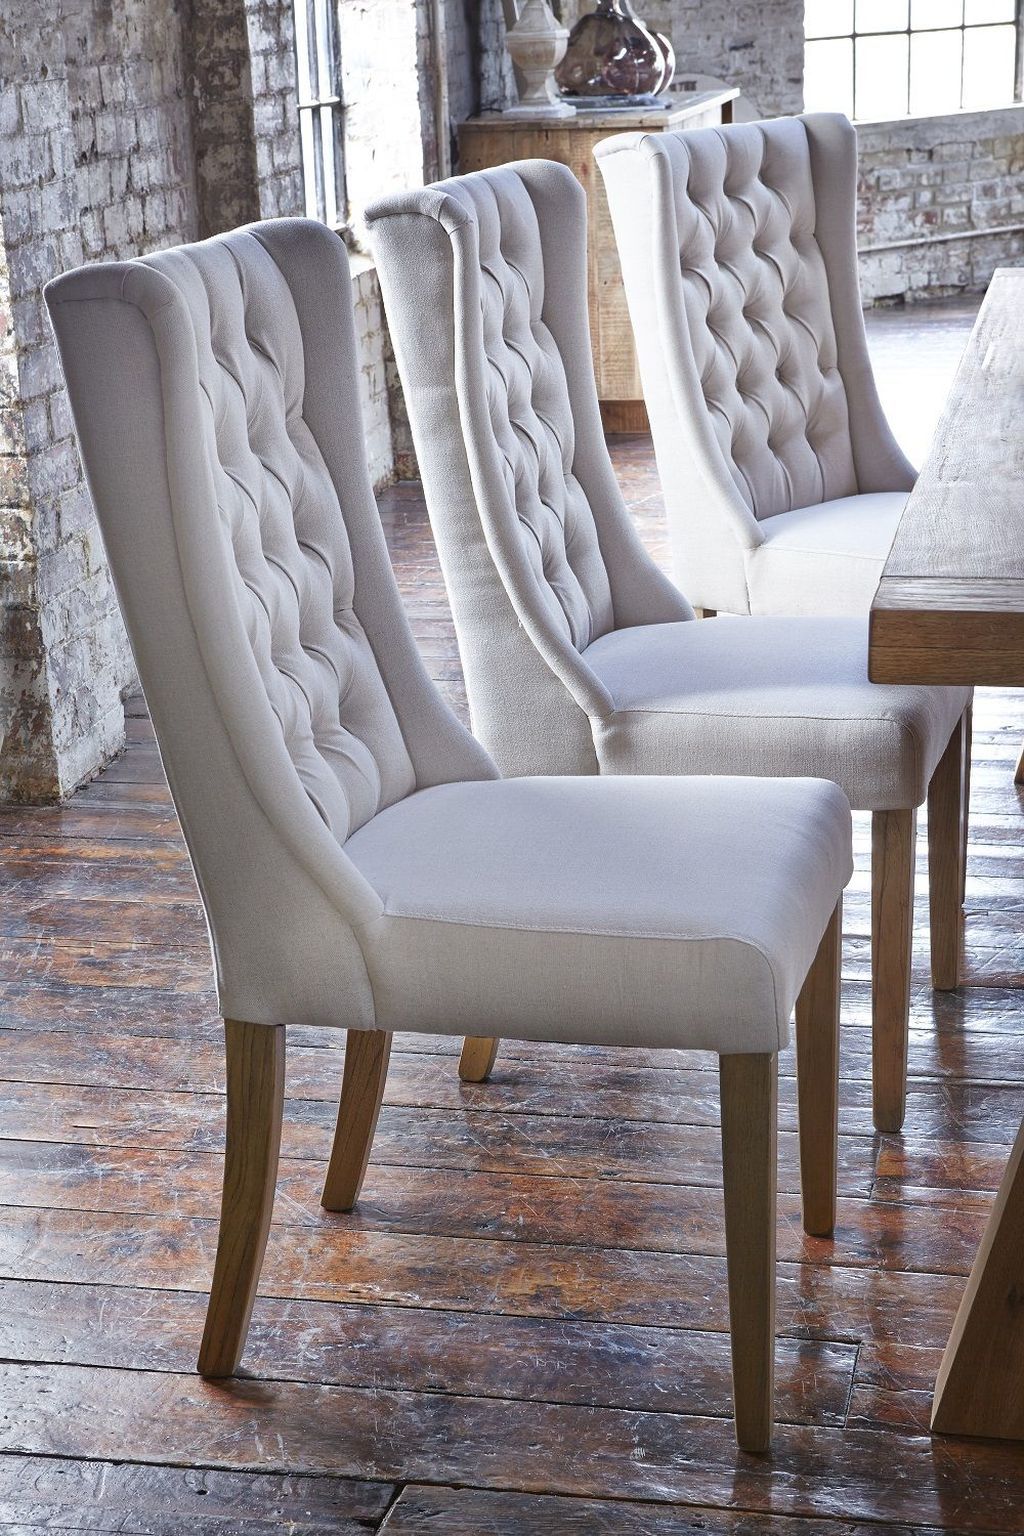 Choose the best upholstery fabrics to revamp your dining room chairs